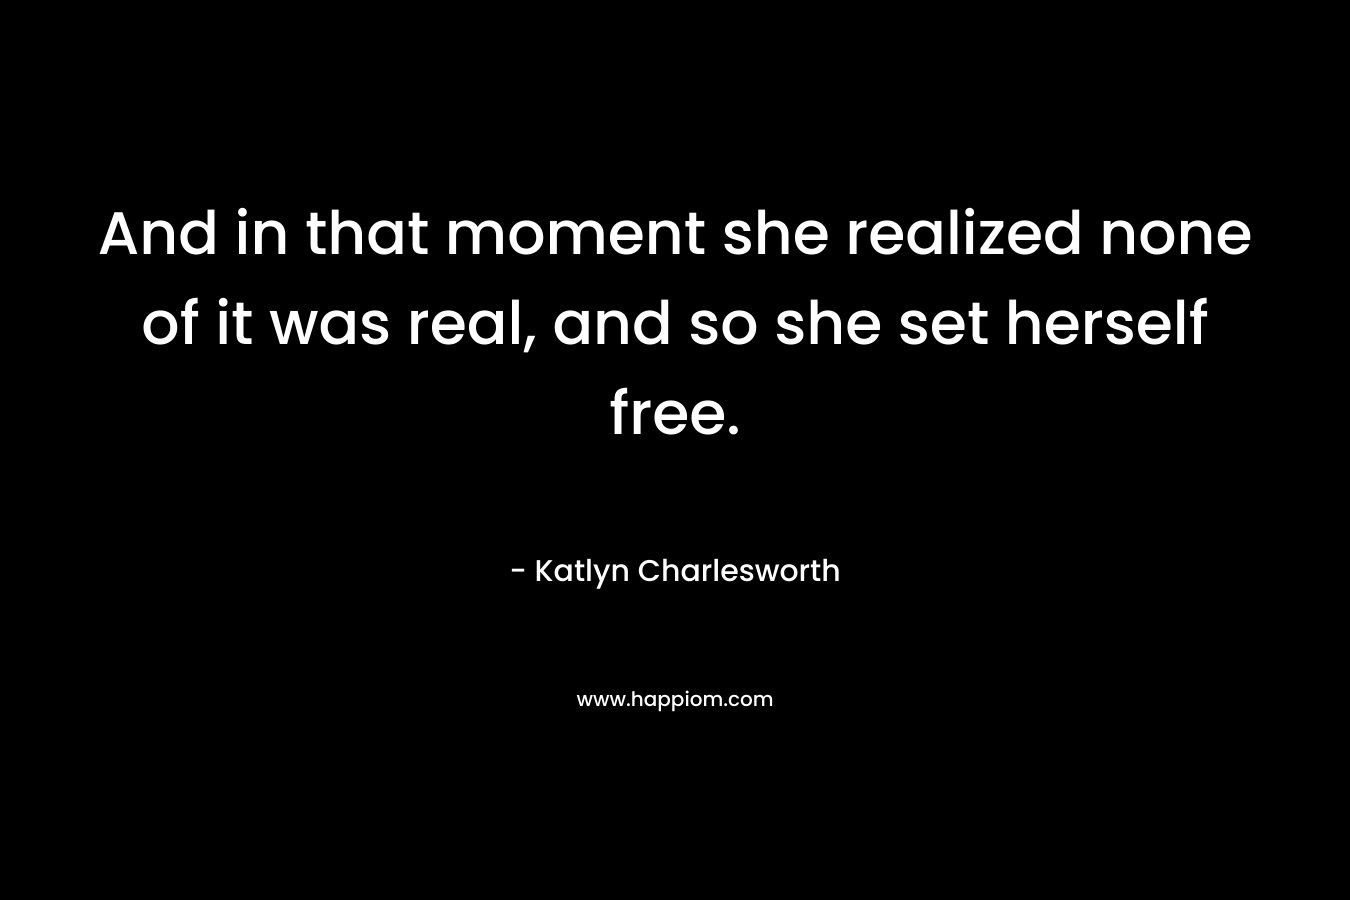 And in that moment she realized none of it was real, and so she set herself free.